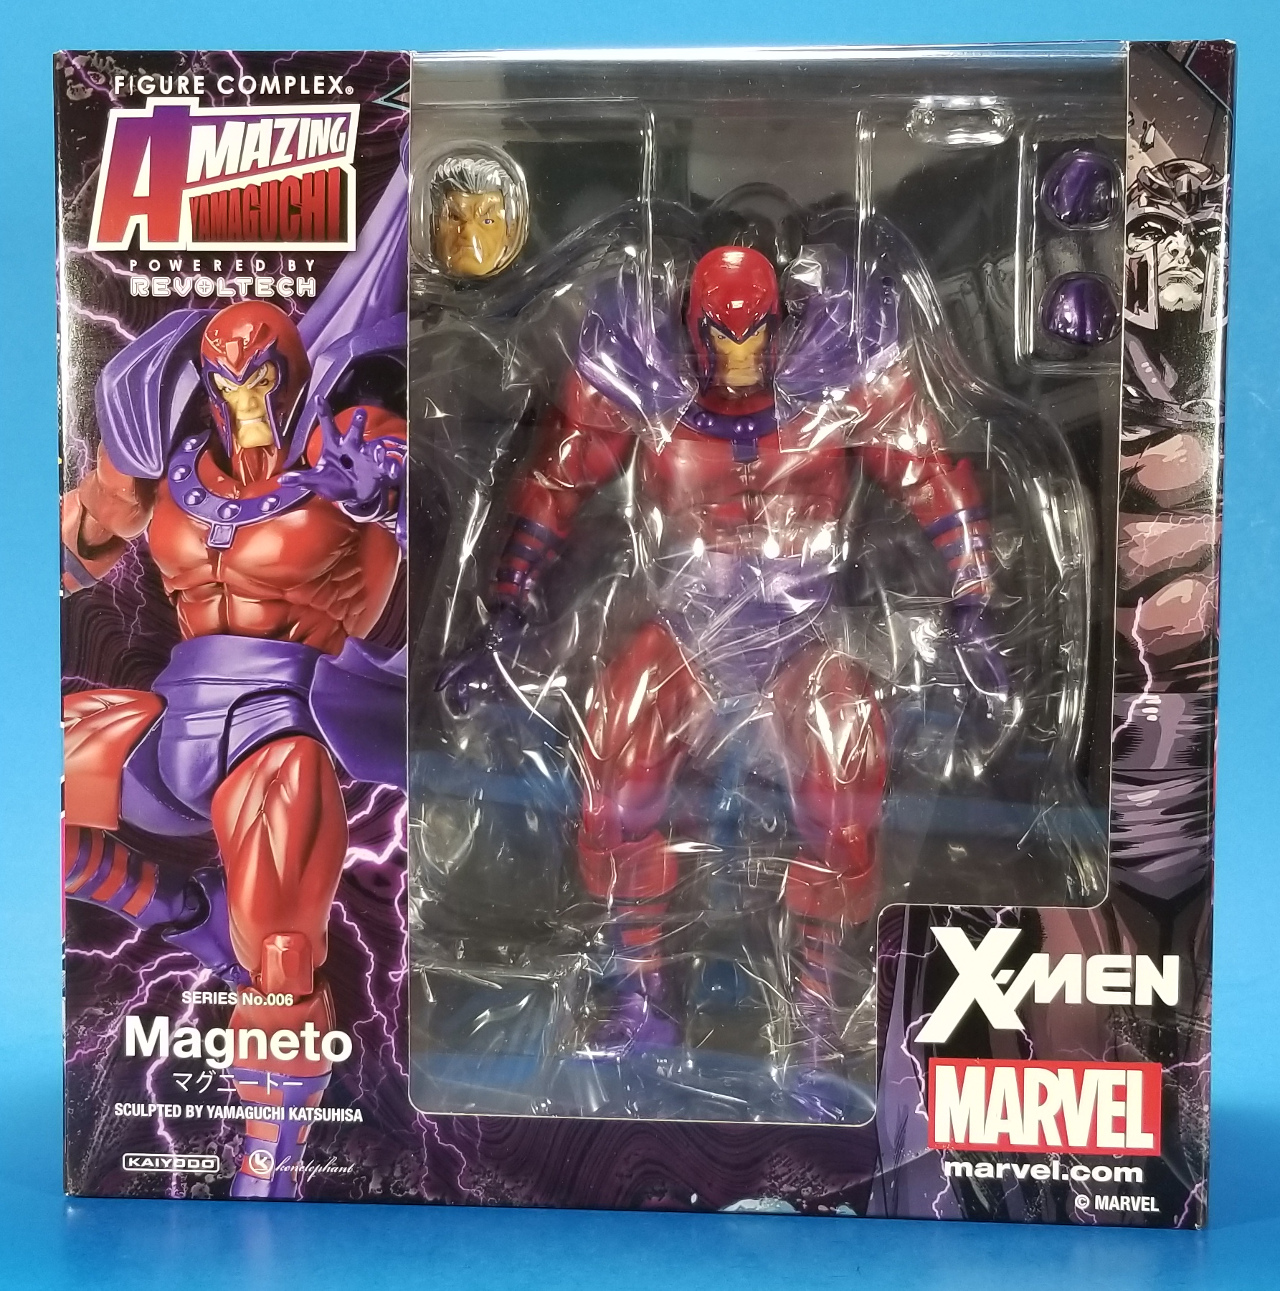 POWERED BY REVOLTECH AMAZING YAMAGUCHI SERIES No.006 X-MEN MAGNETO FIGURE COMPLE 